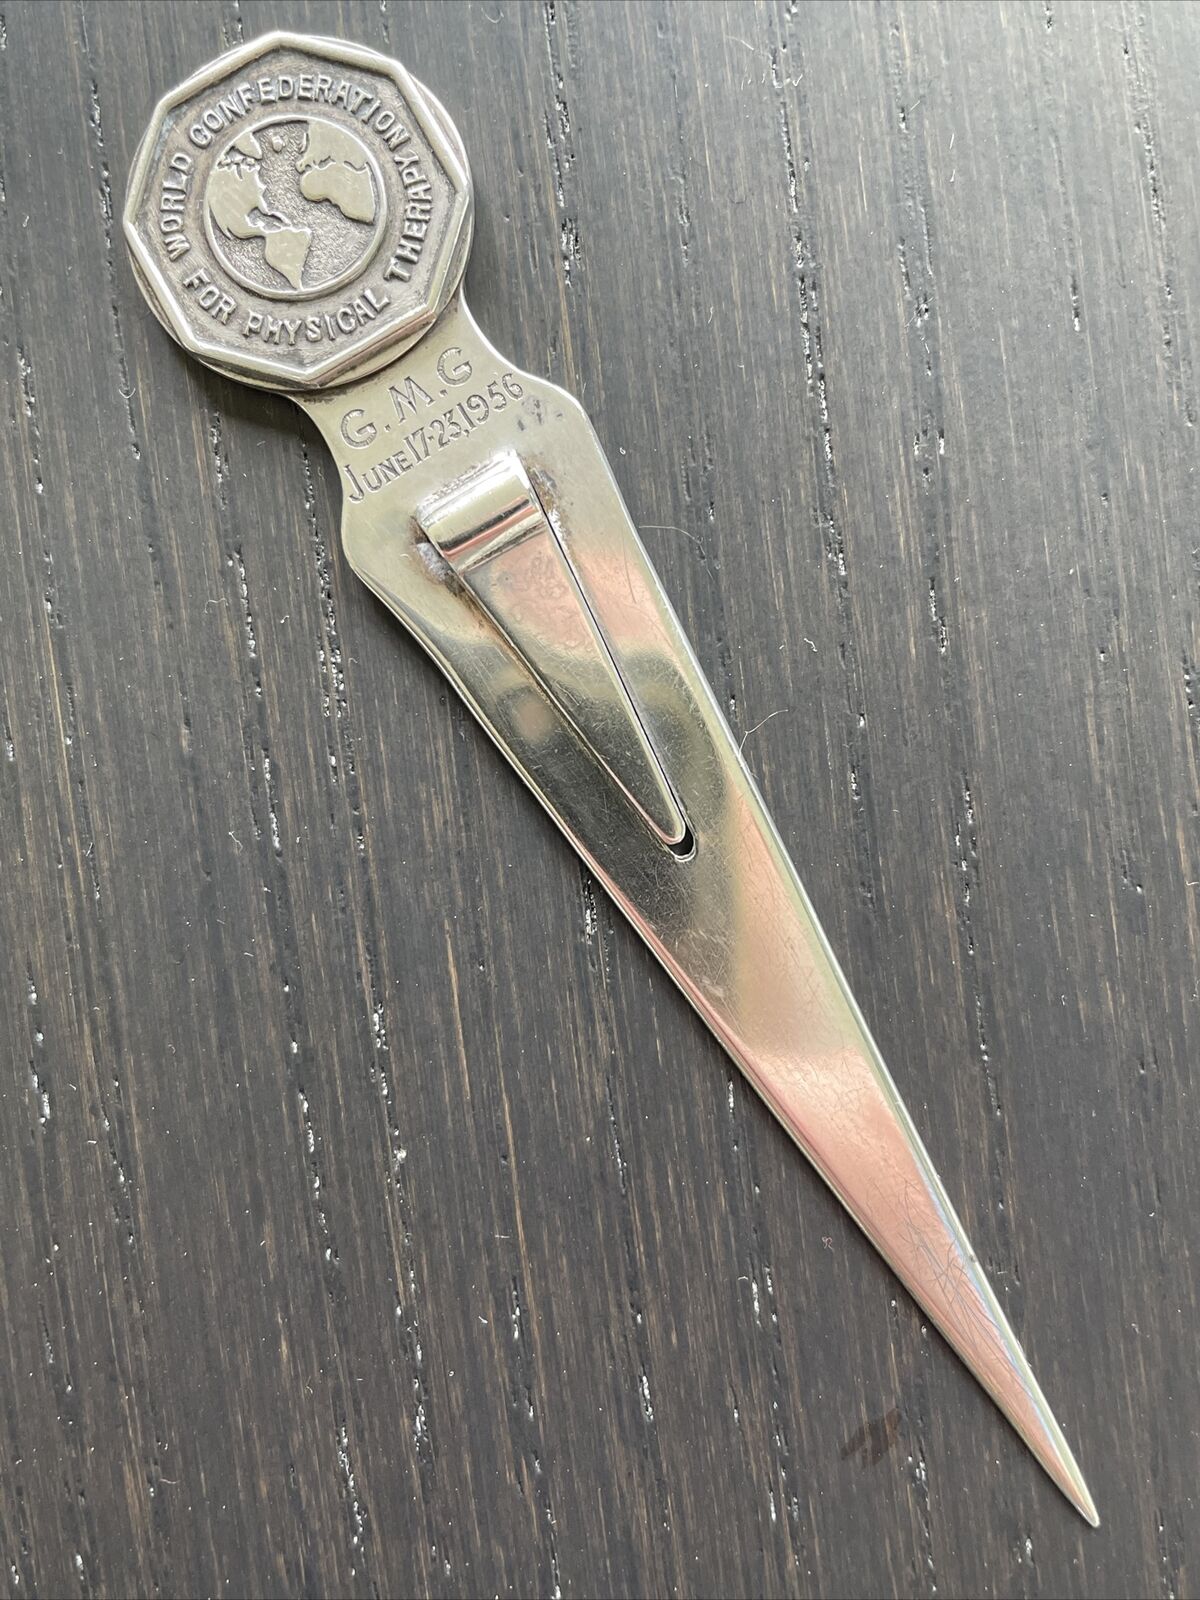 Extremely Rare Physical Therapist’s Silver Bookmark - 1956 World Confederation